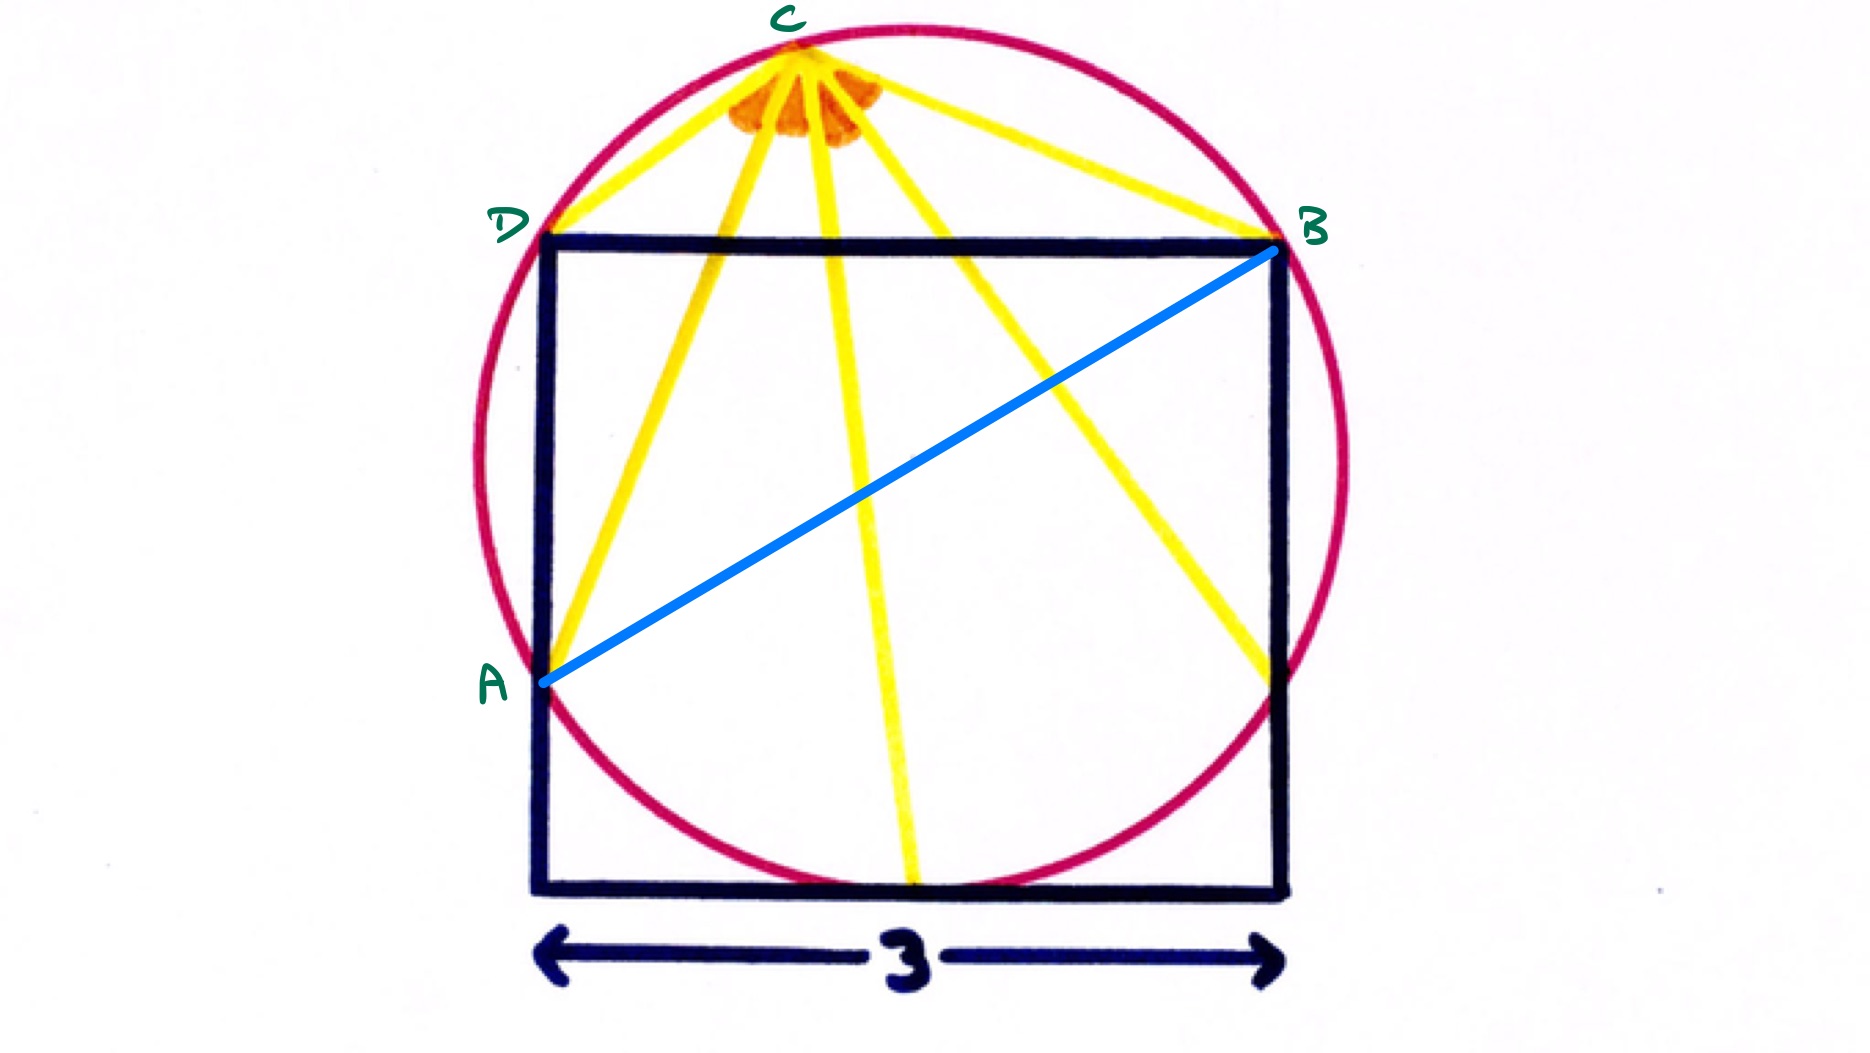 Rectangle overlapping a circle labelled